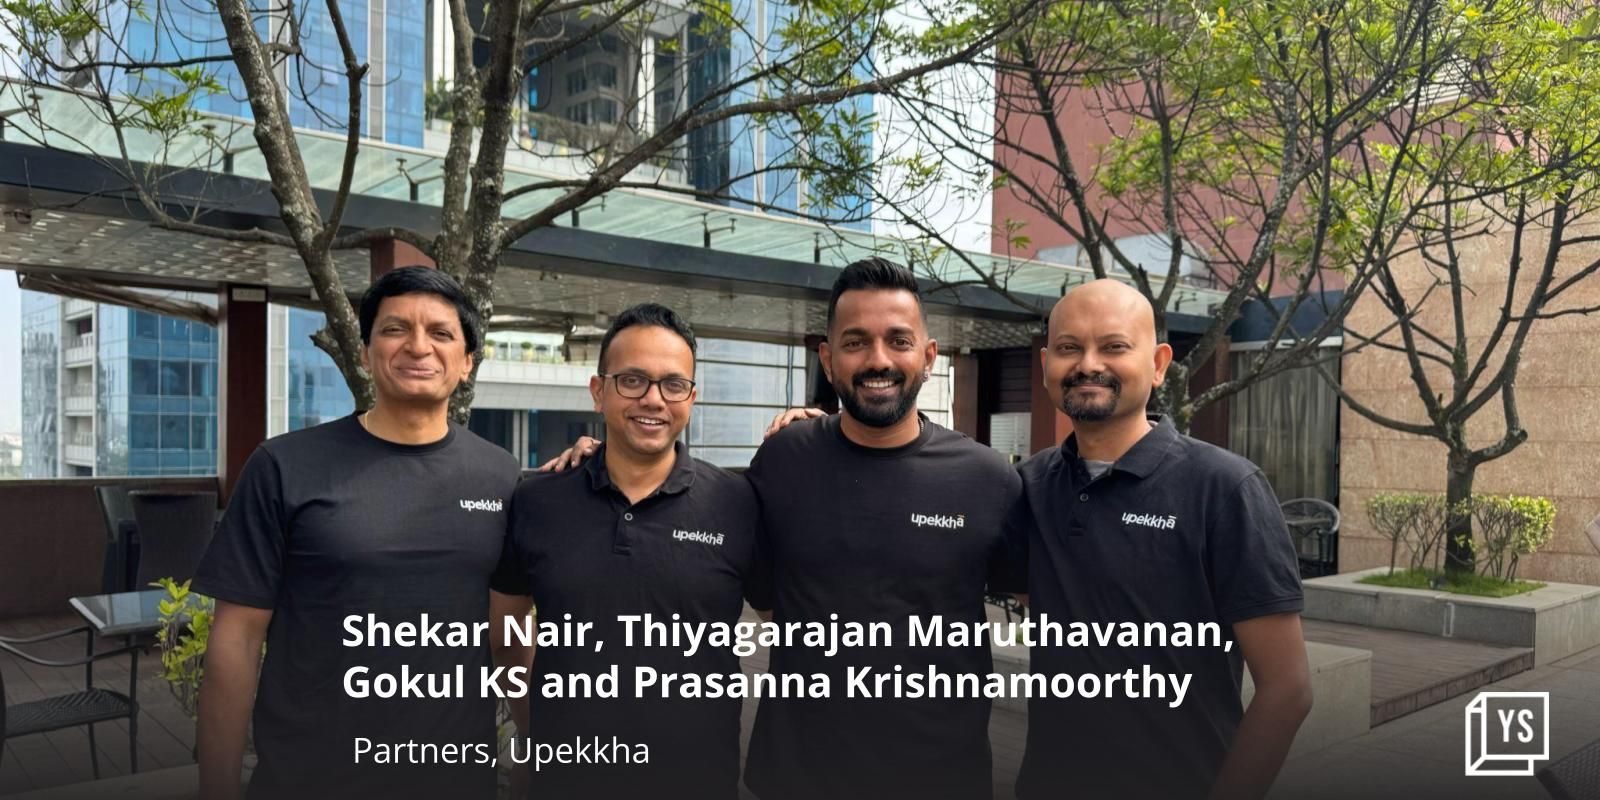 Upekkha secures $15M in first close of $40M Fund led by WestBridge Capital